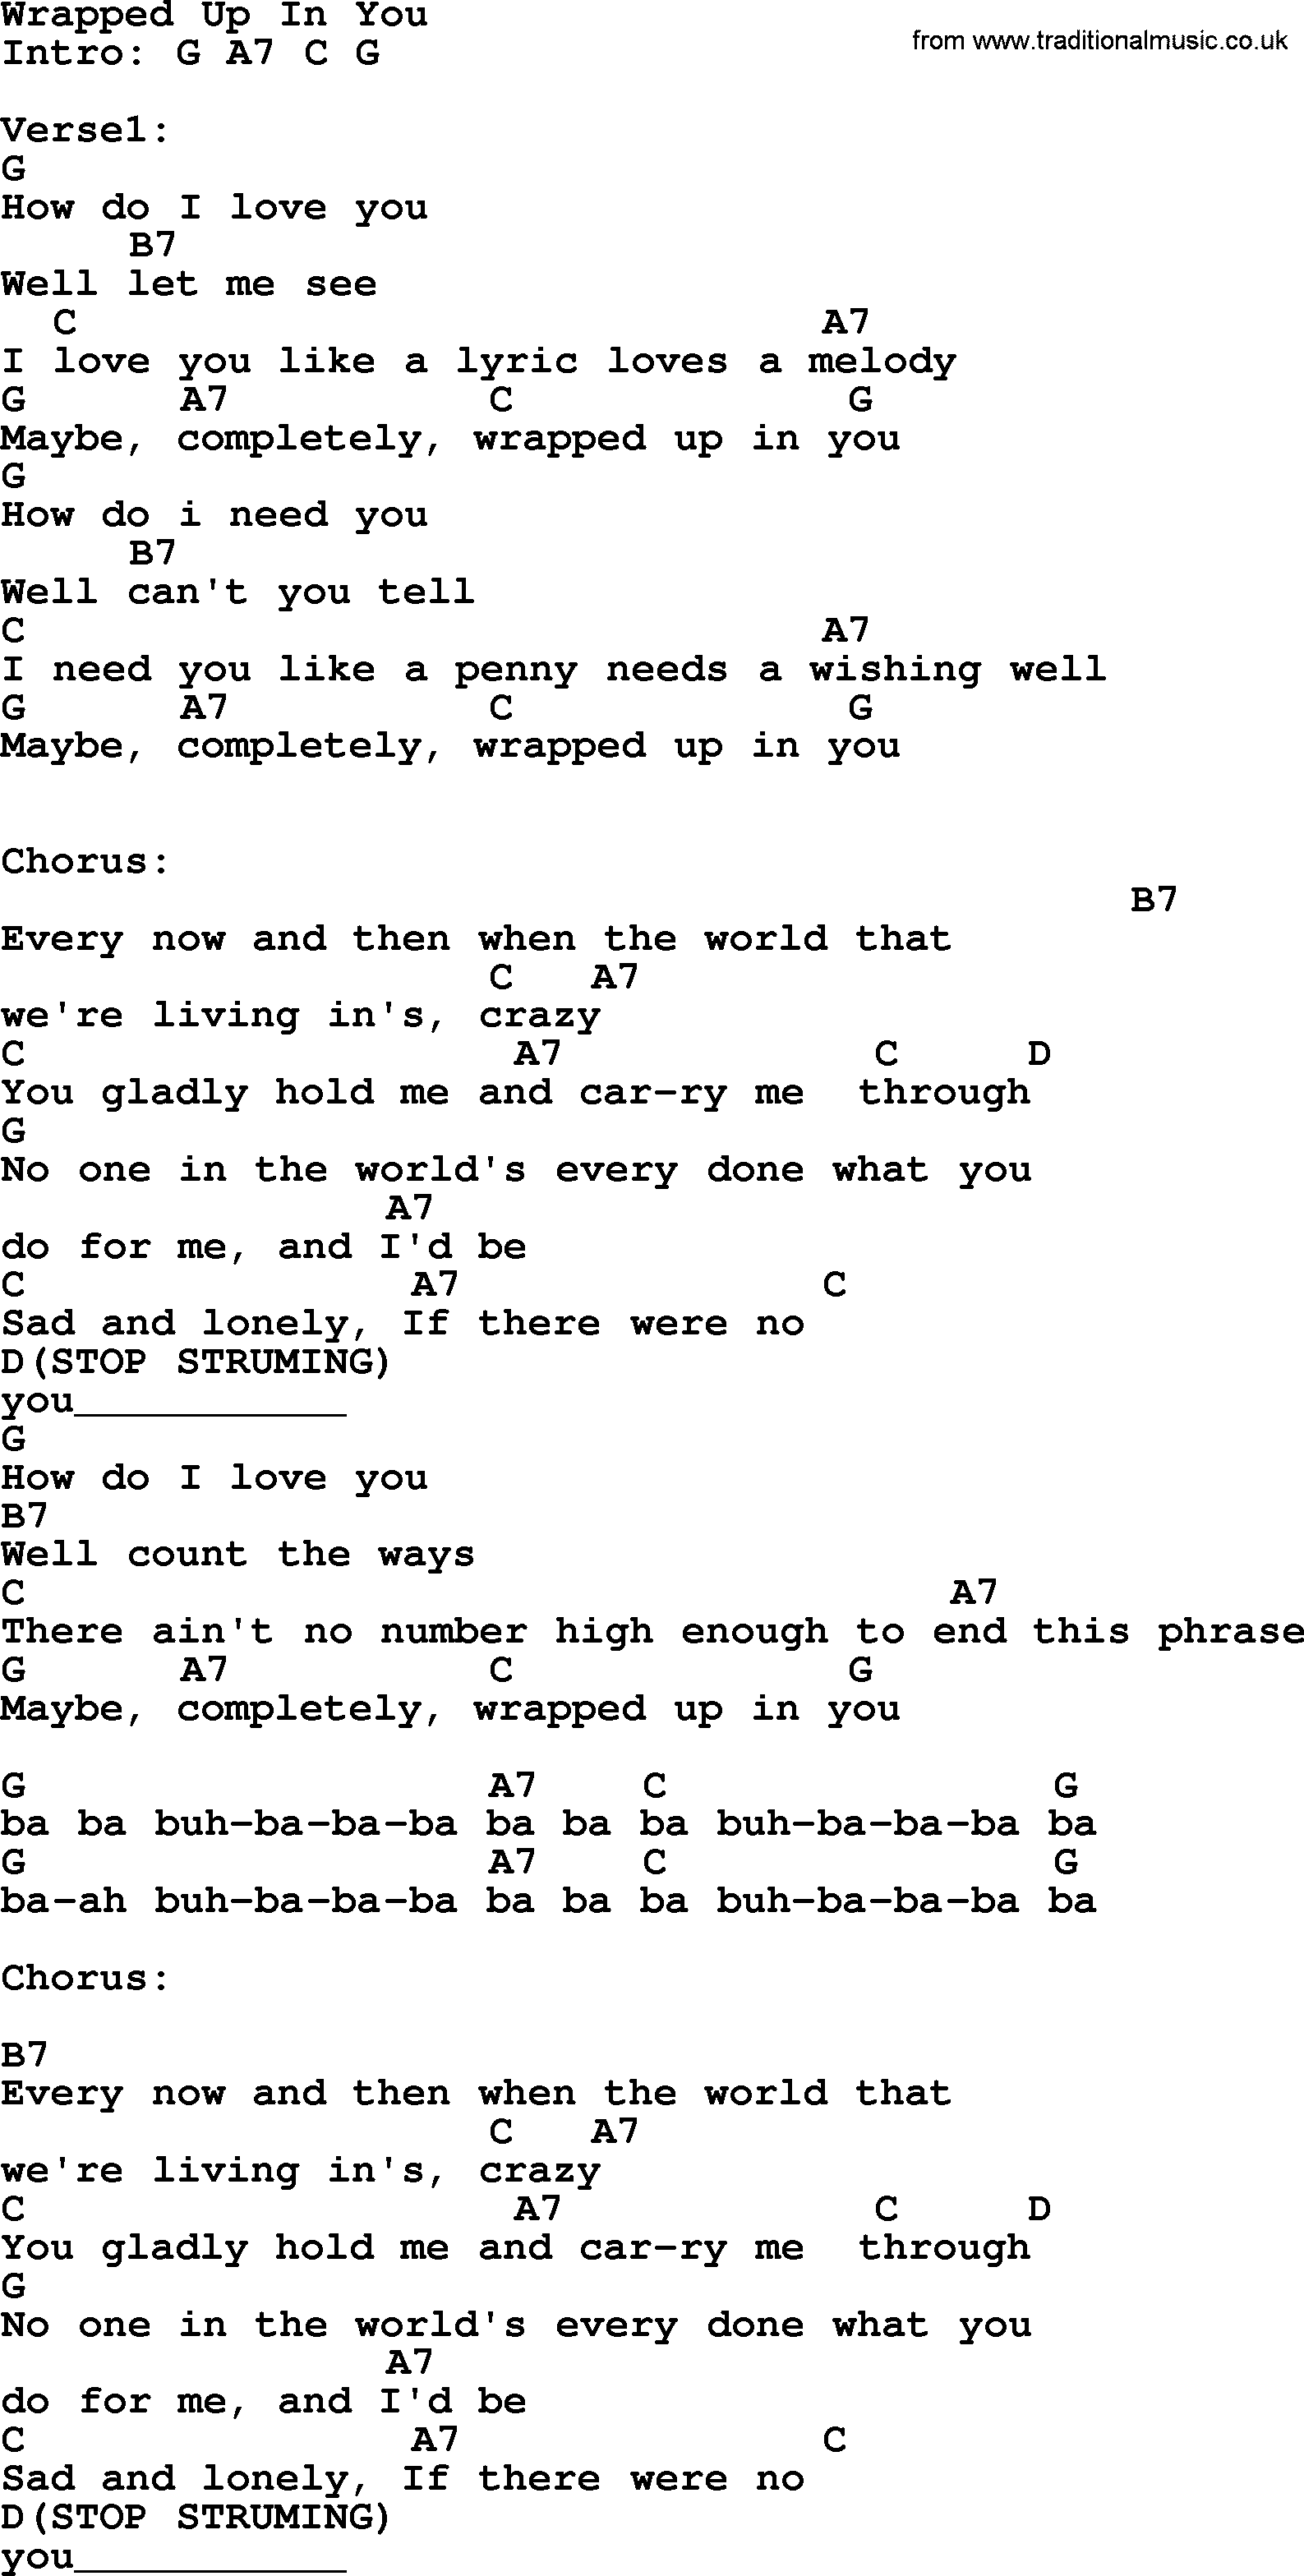 Garth Brooks song: Wrapped Up In You, lyrics and chords